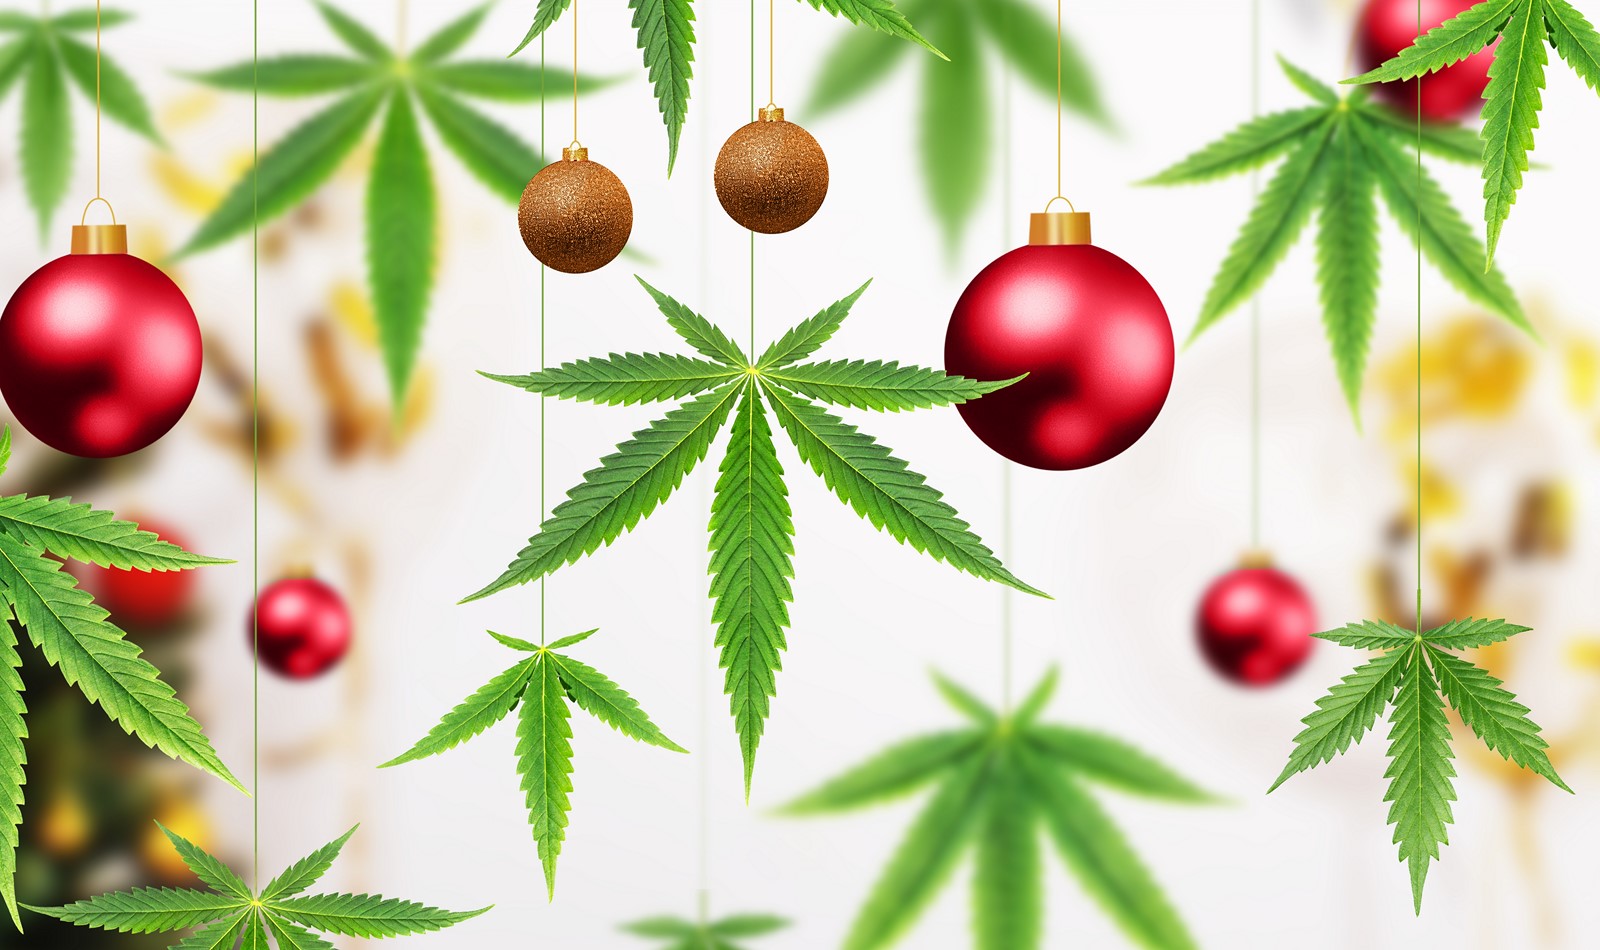 Cannabis gift ideas for this special time of year